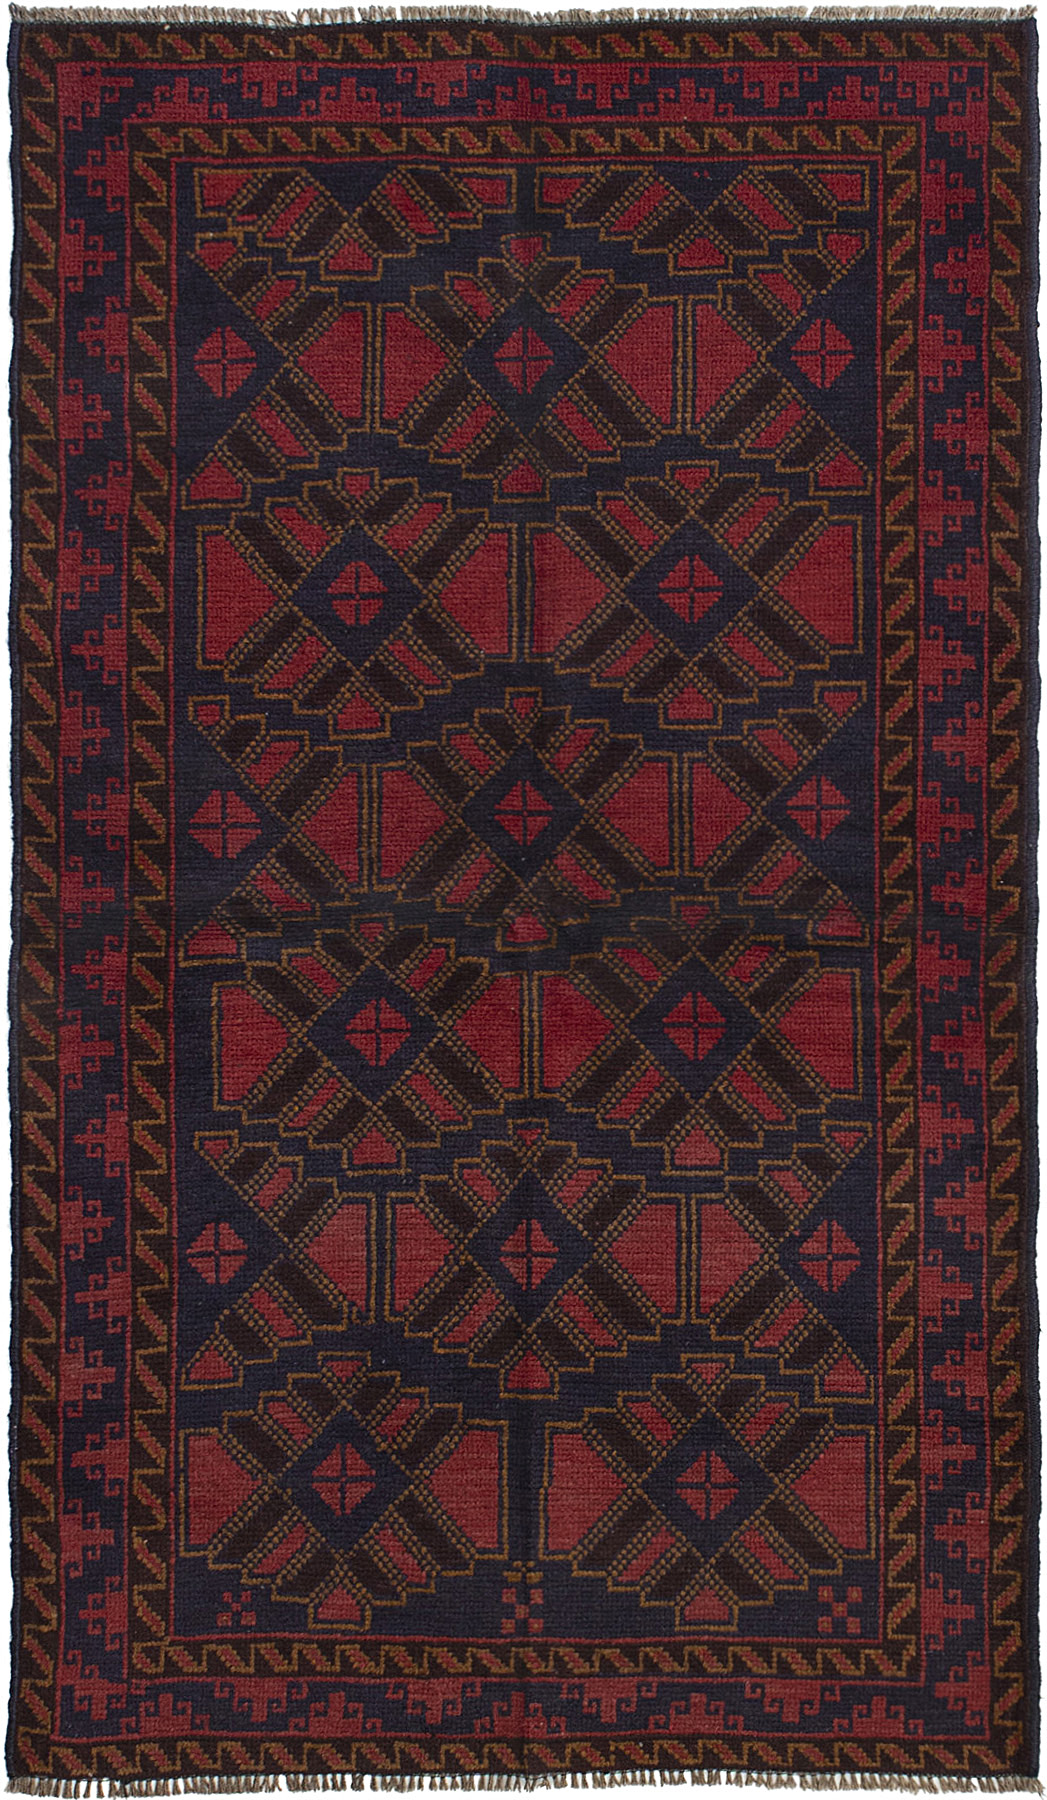 Hand-knotted Teimani Dark Navy, Red Wool Rug 3'5" x 6'0"  Size: 3'5" x 6'0"  